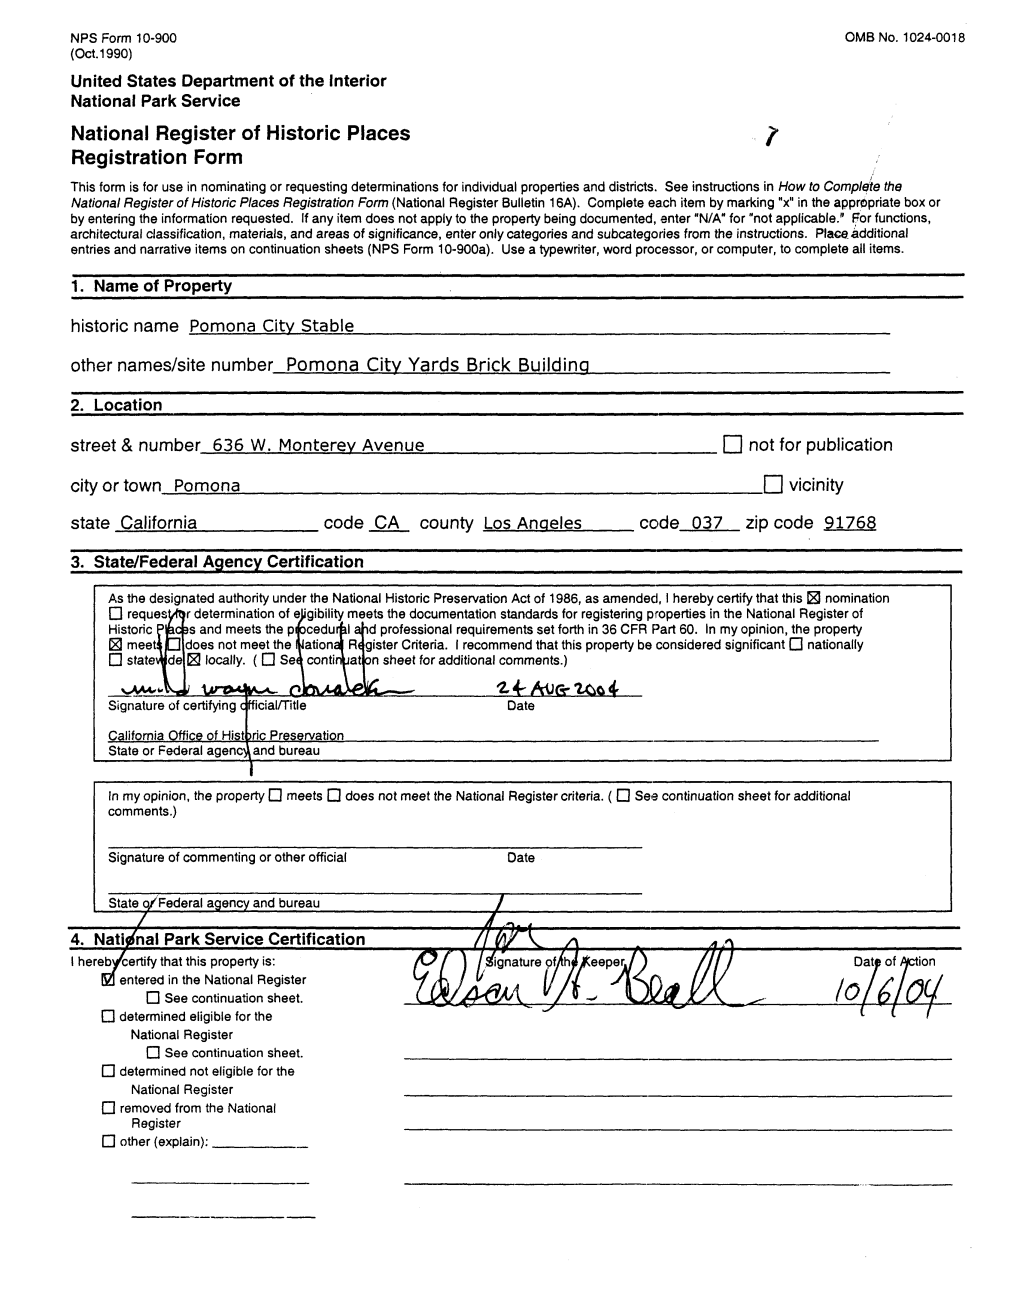 National Register of Historic Places / Registration Form This Form Is for Use in Nominating Or Requesting Determinations for Individual Properties and Districts